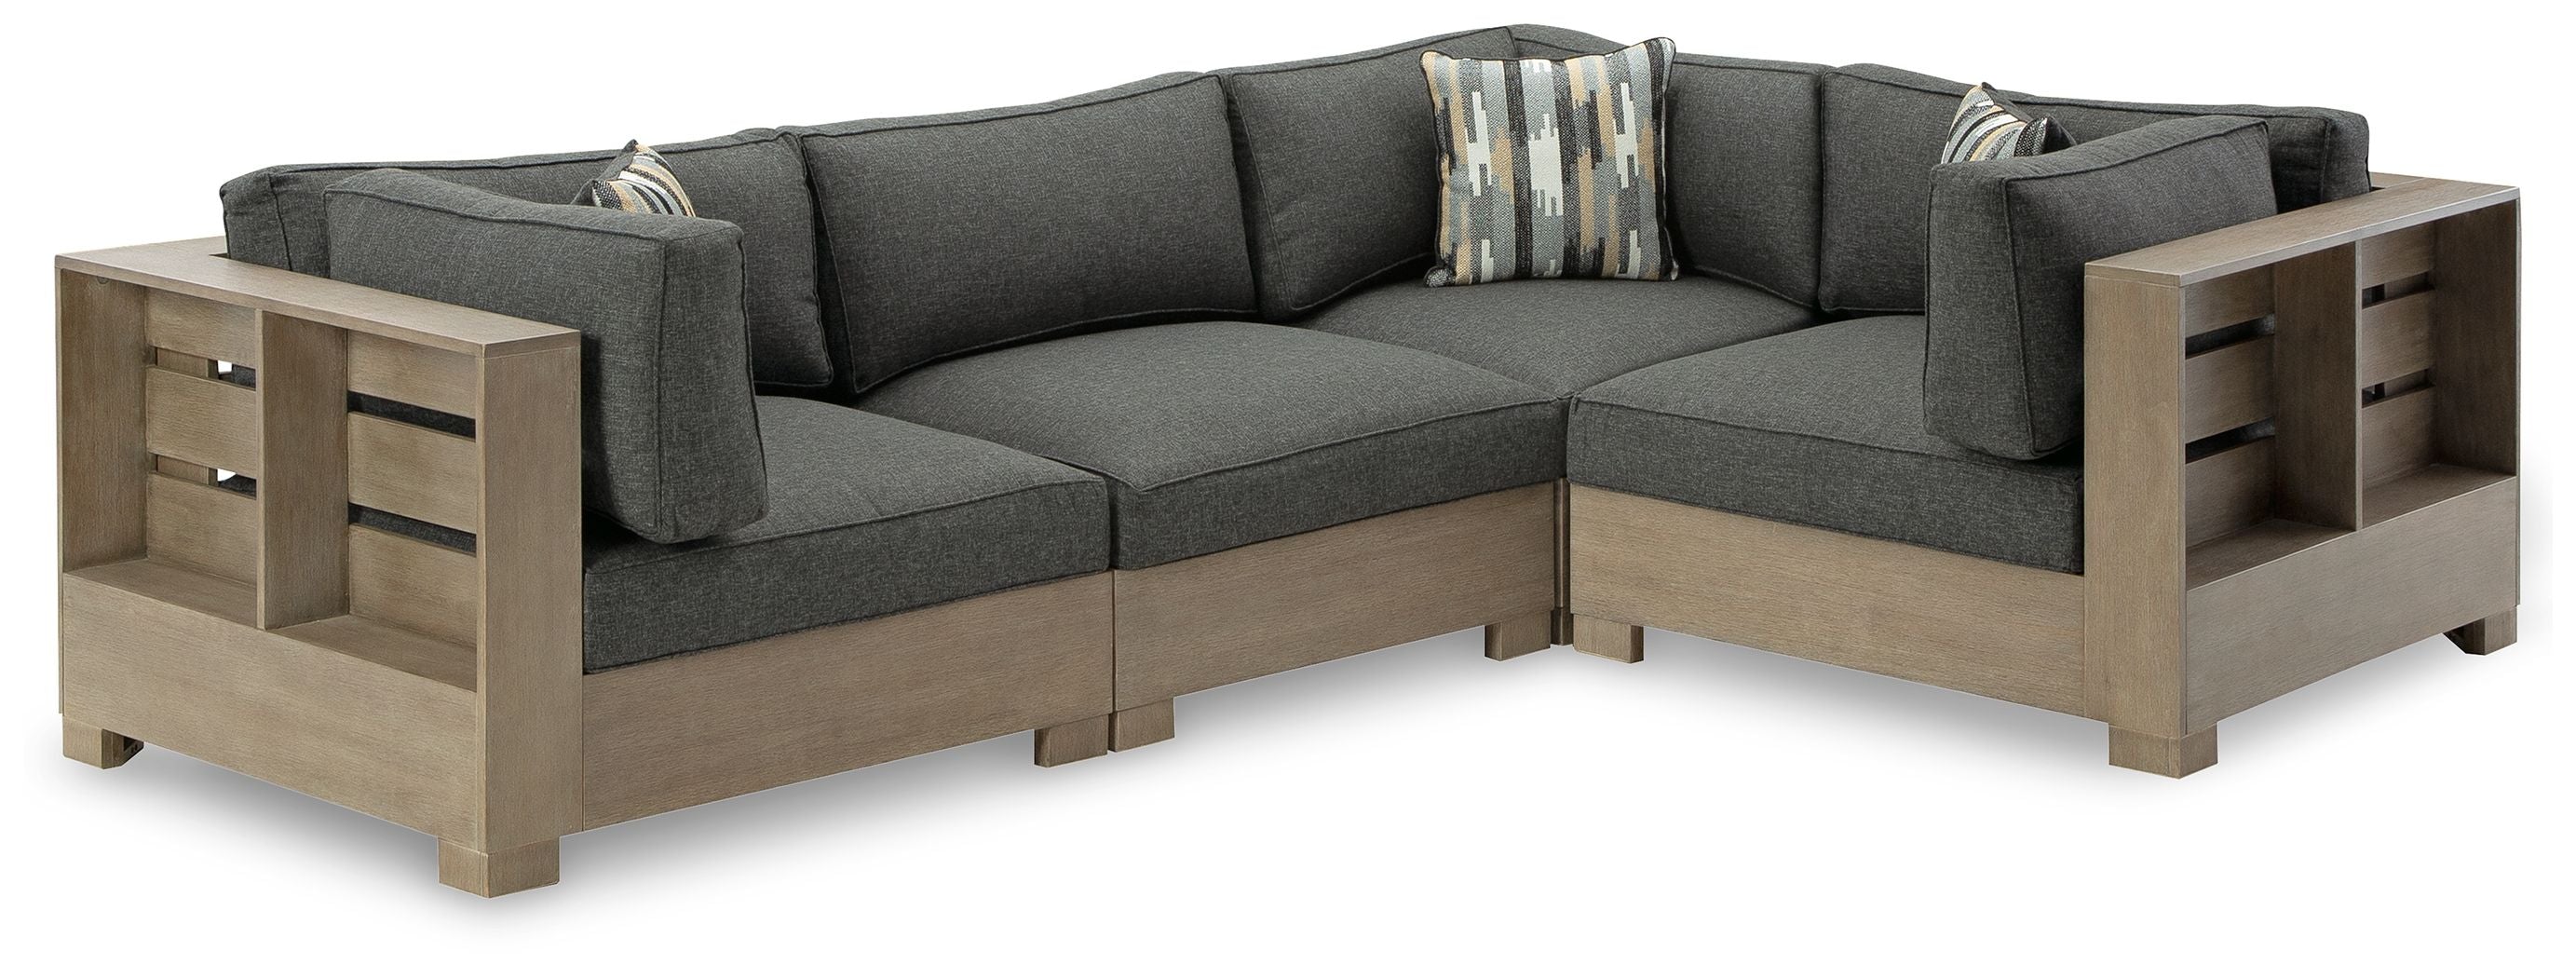 Citrine Park - Brown - 4-Piece Outdoor Sectional-Stationary Sectionals-American Furniture Outlet